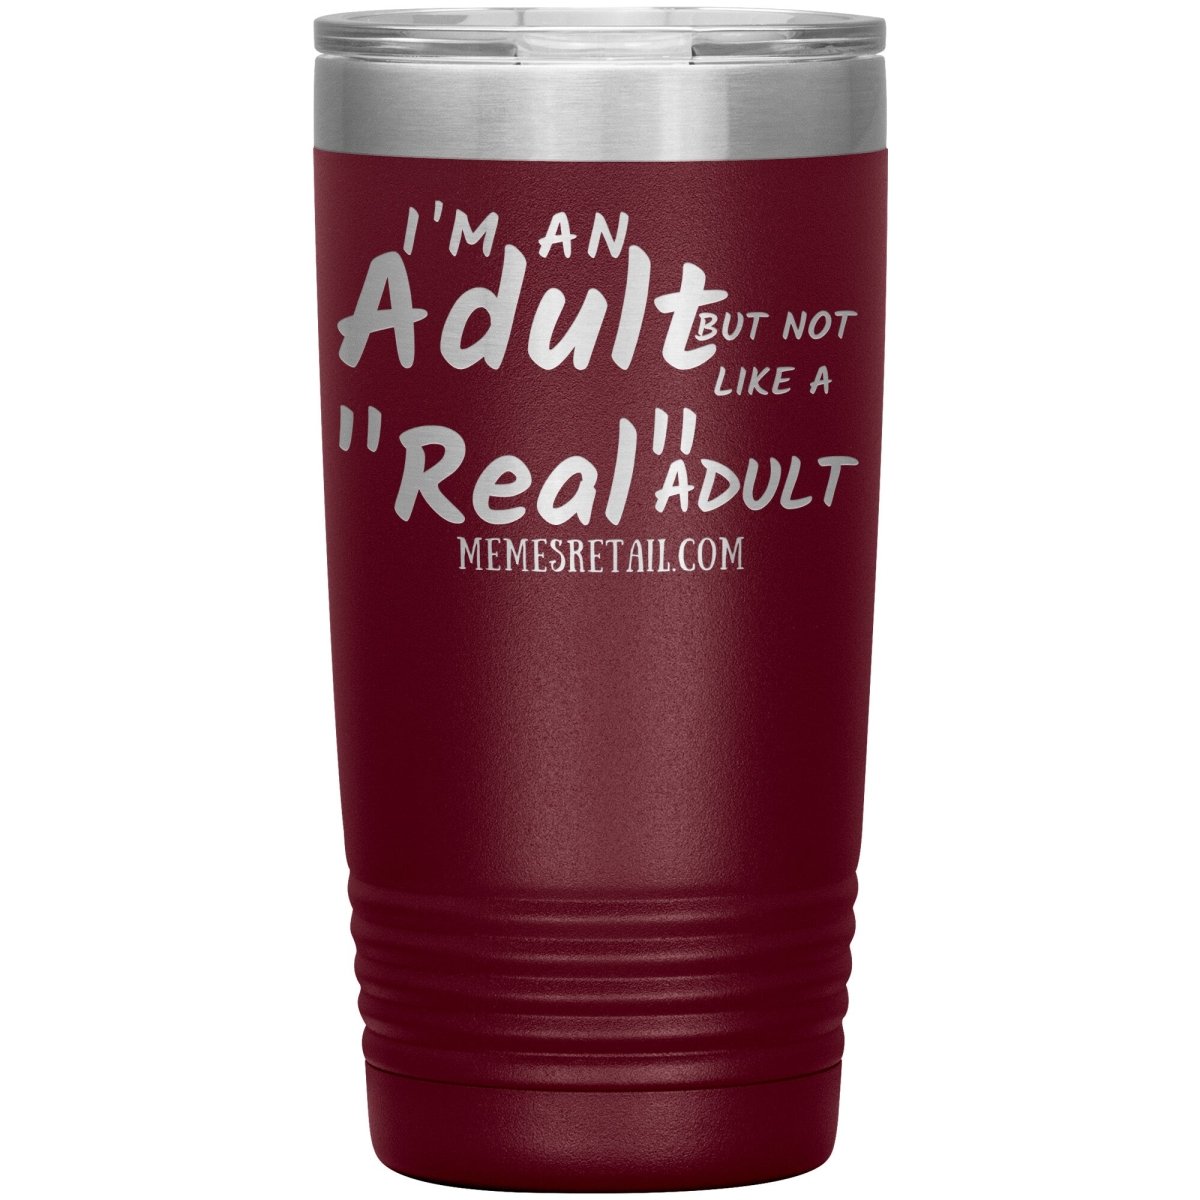 I'm an adult, but not like a "real" adult Tumblers, 20oz Insulated Tumbler / Maroon - MemesRetail.com